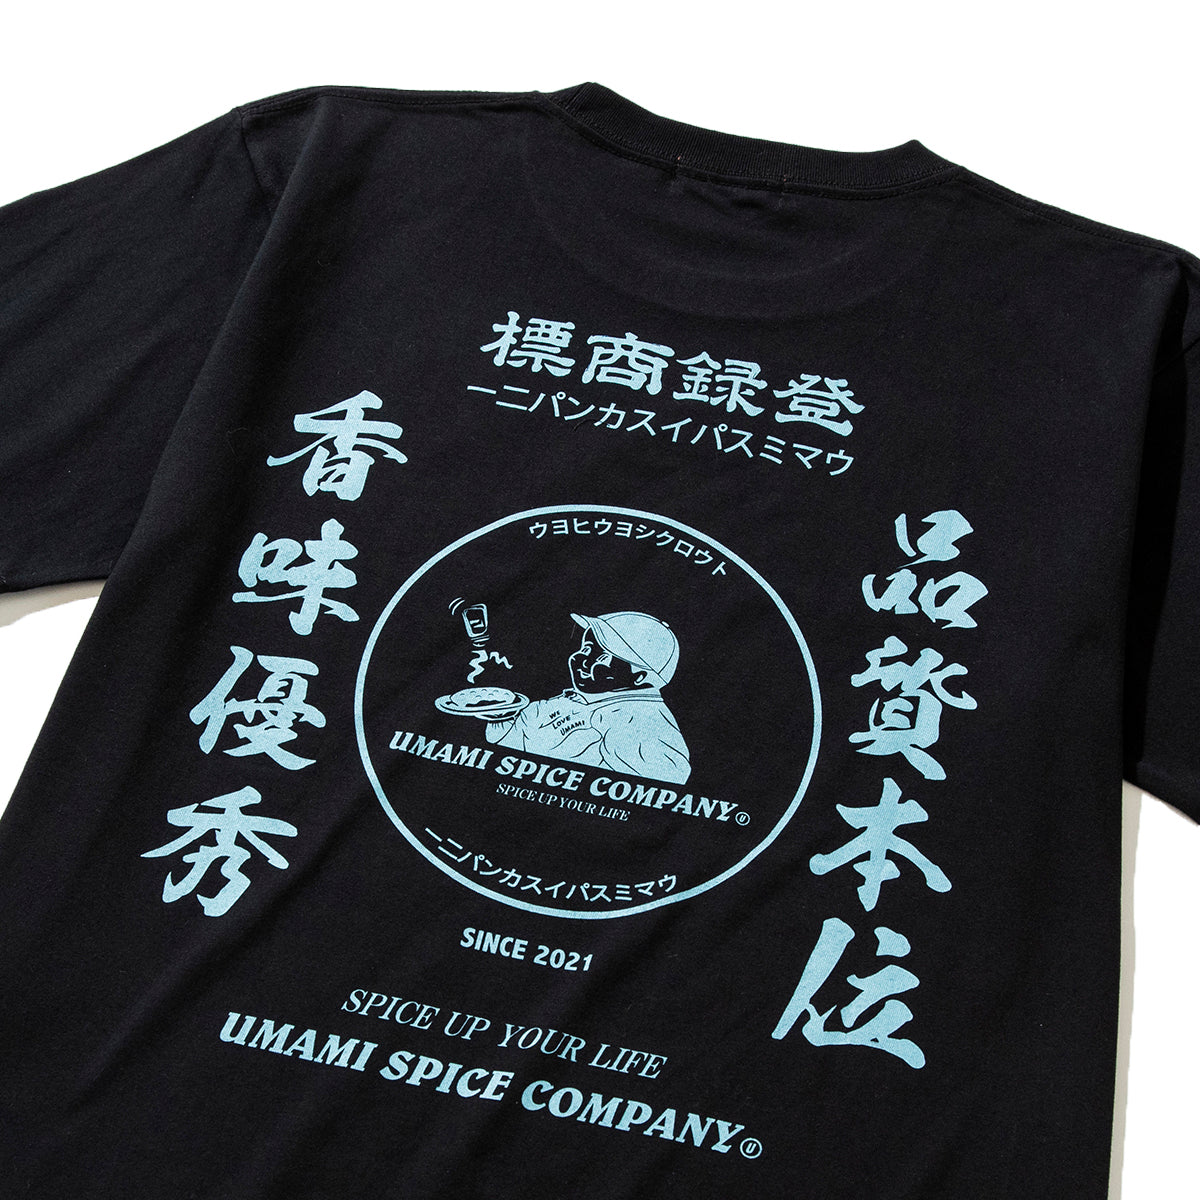 CORPORATE T-SHIRT for Kinetics